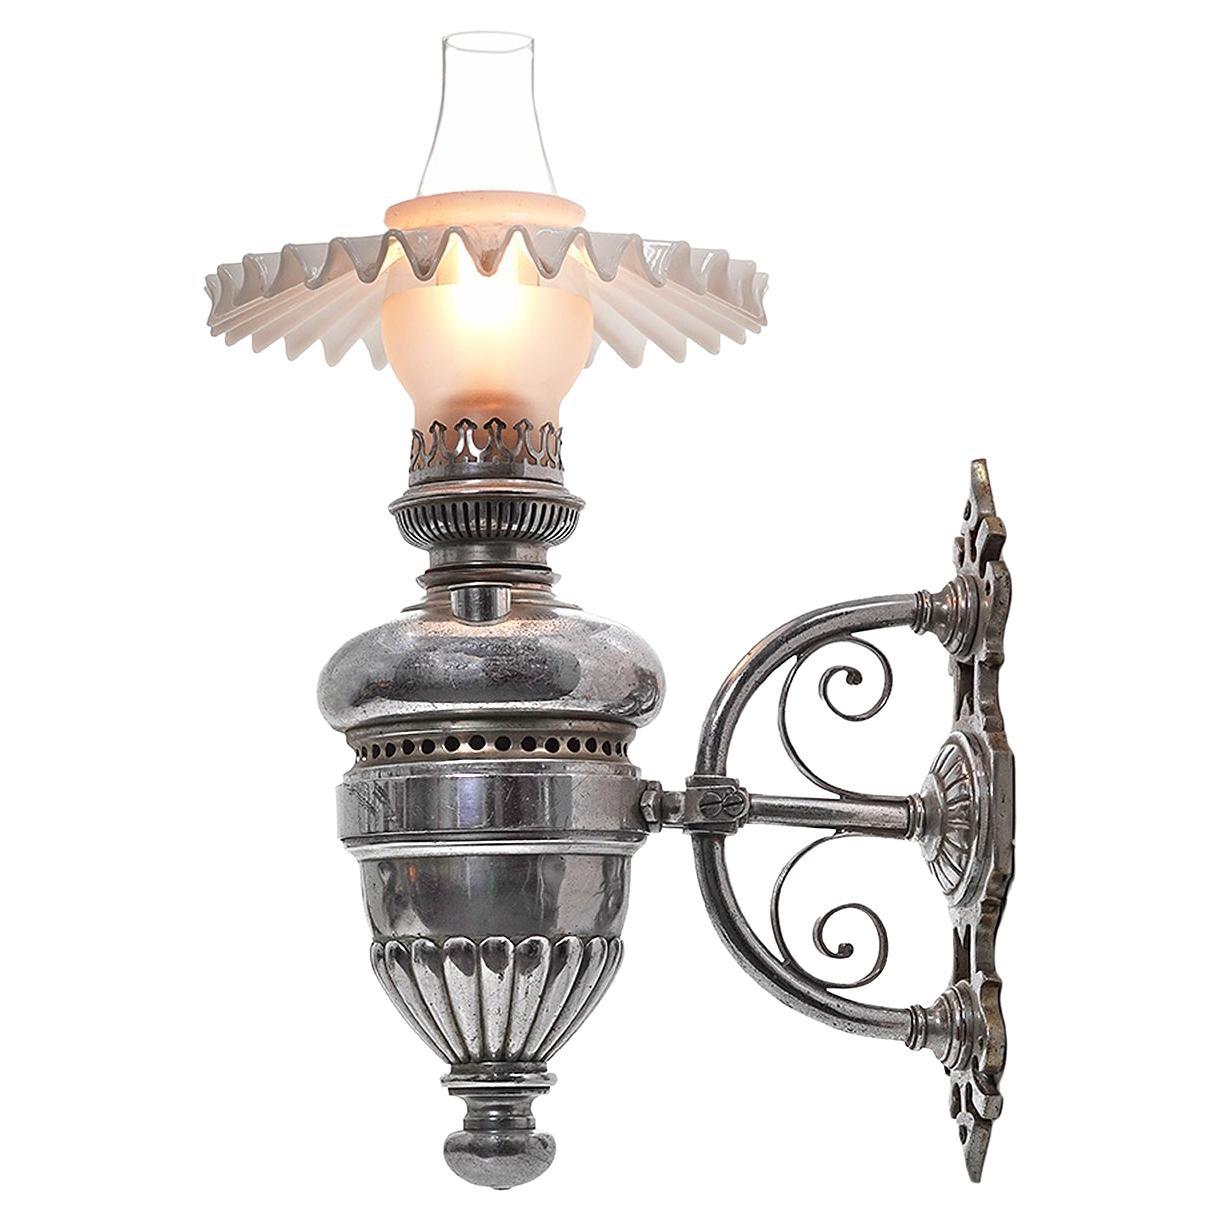 Ornate Nickel Plated Belgian Lamp Co. Sconce 1884 For Sale